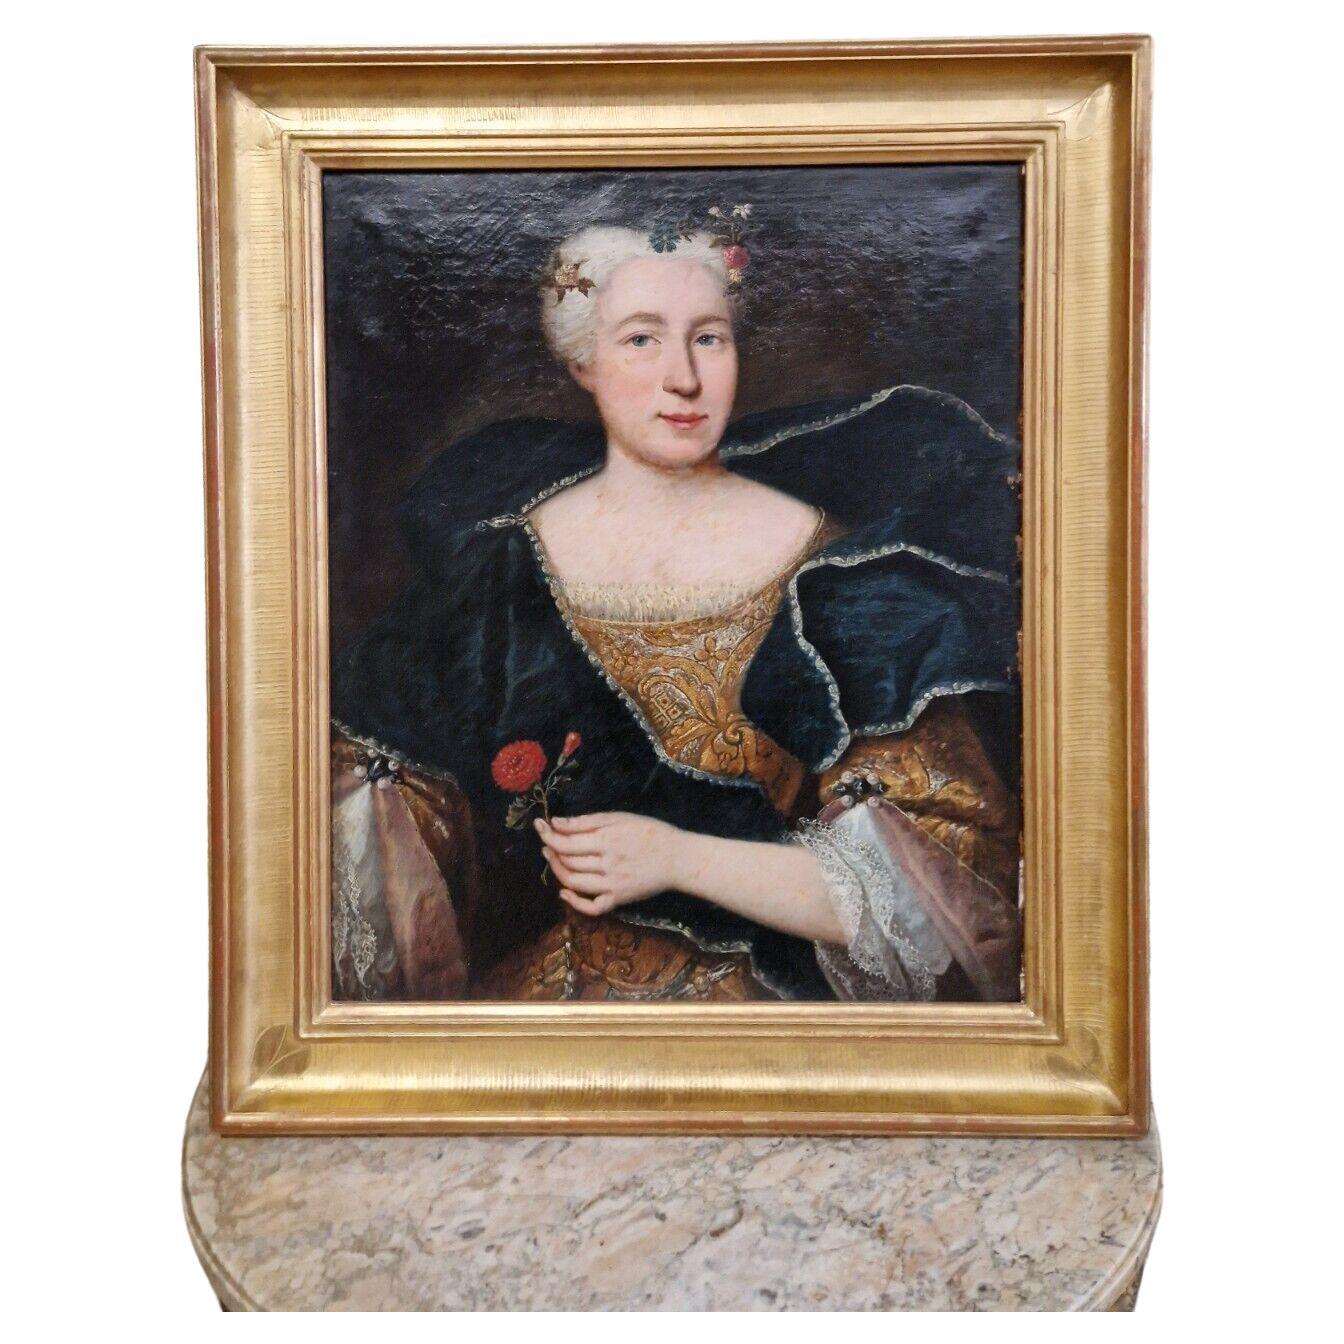 ROCAILLE ANTIQUES

This exquisite 18th century oil painting possibly depicts a portrait of Maria Anna Adelheid of Hohenlohe -Bartenstien  (1701-1758)  in the 18th century, framed beautifully in a gilded wood frame from an award wining framer MME